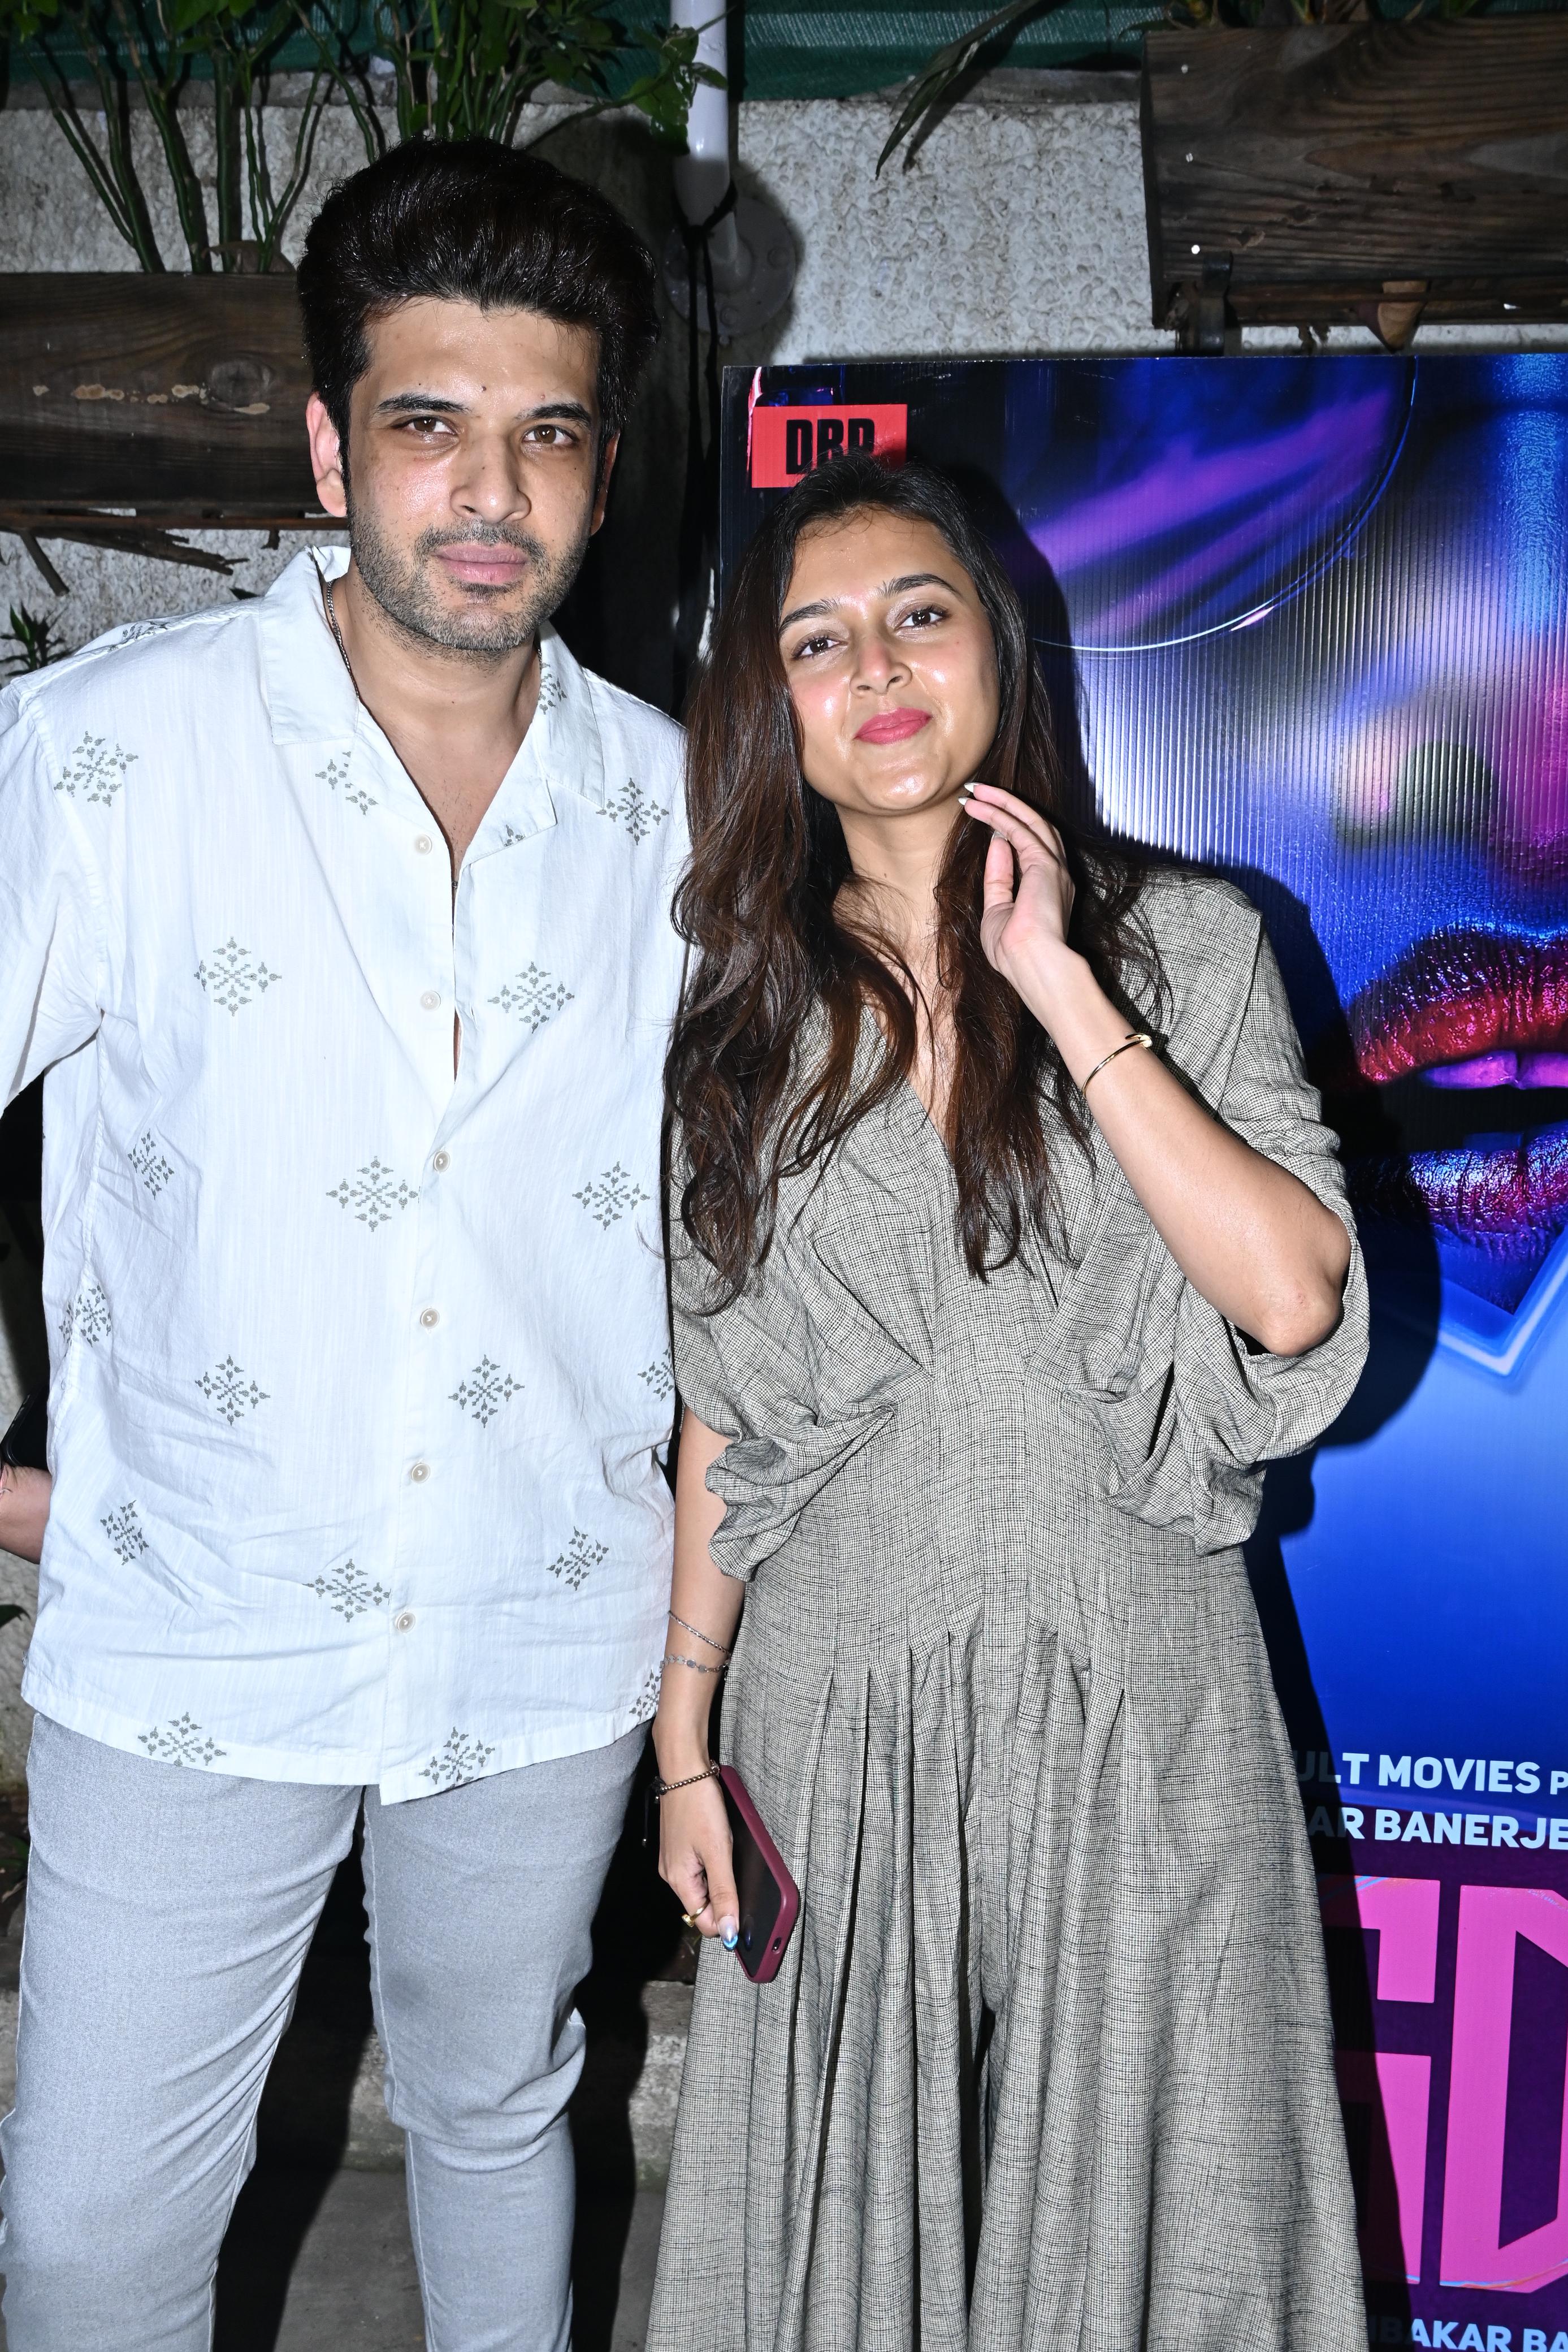 Love birds Tejasswi Prakash and Karan Kundrra posed together as they attended the screening of LSD 2